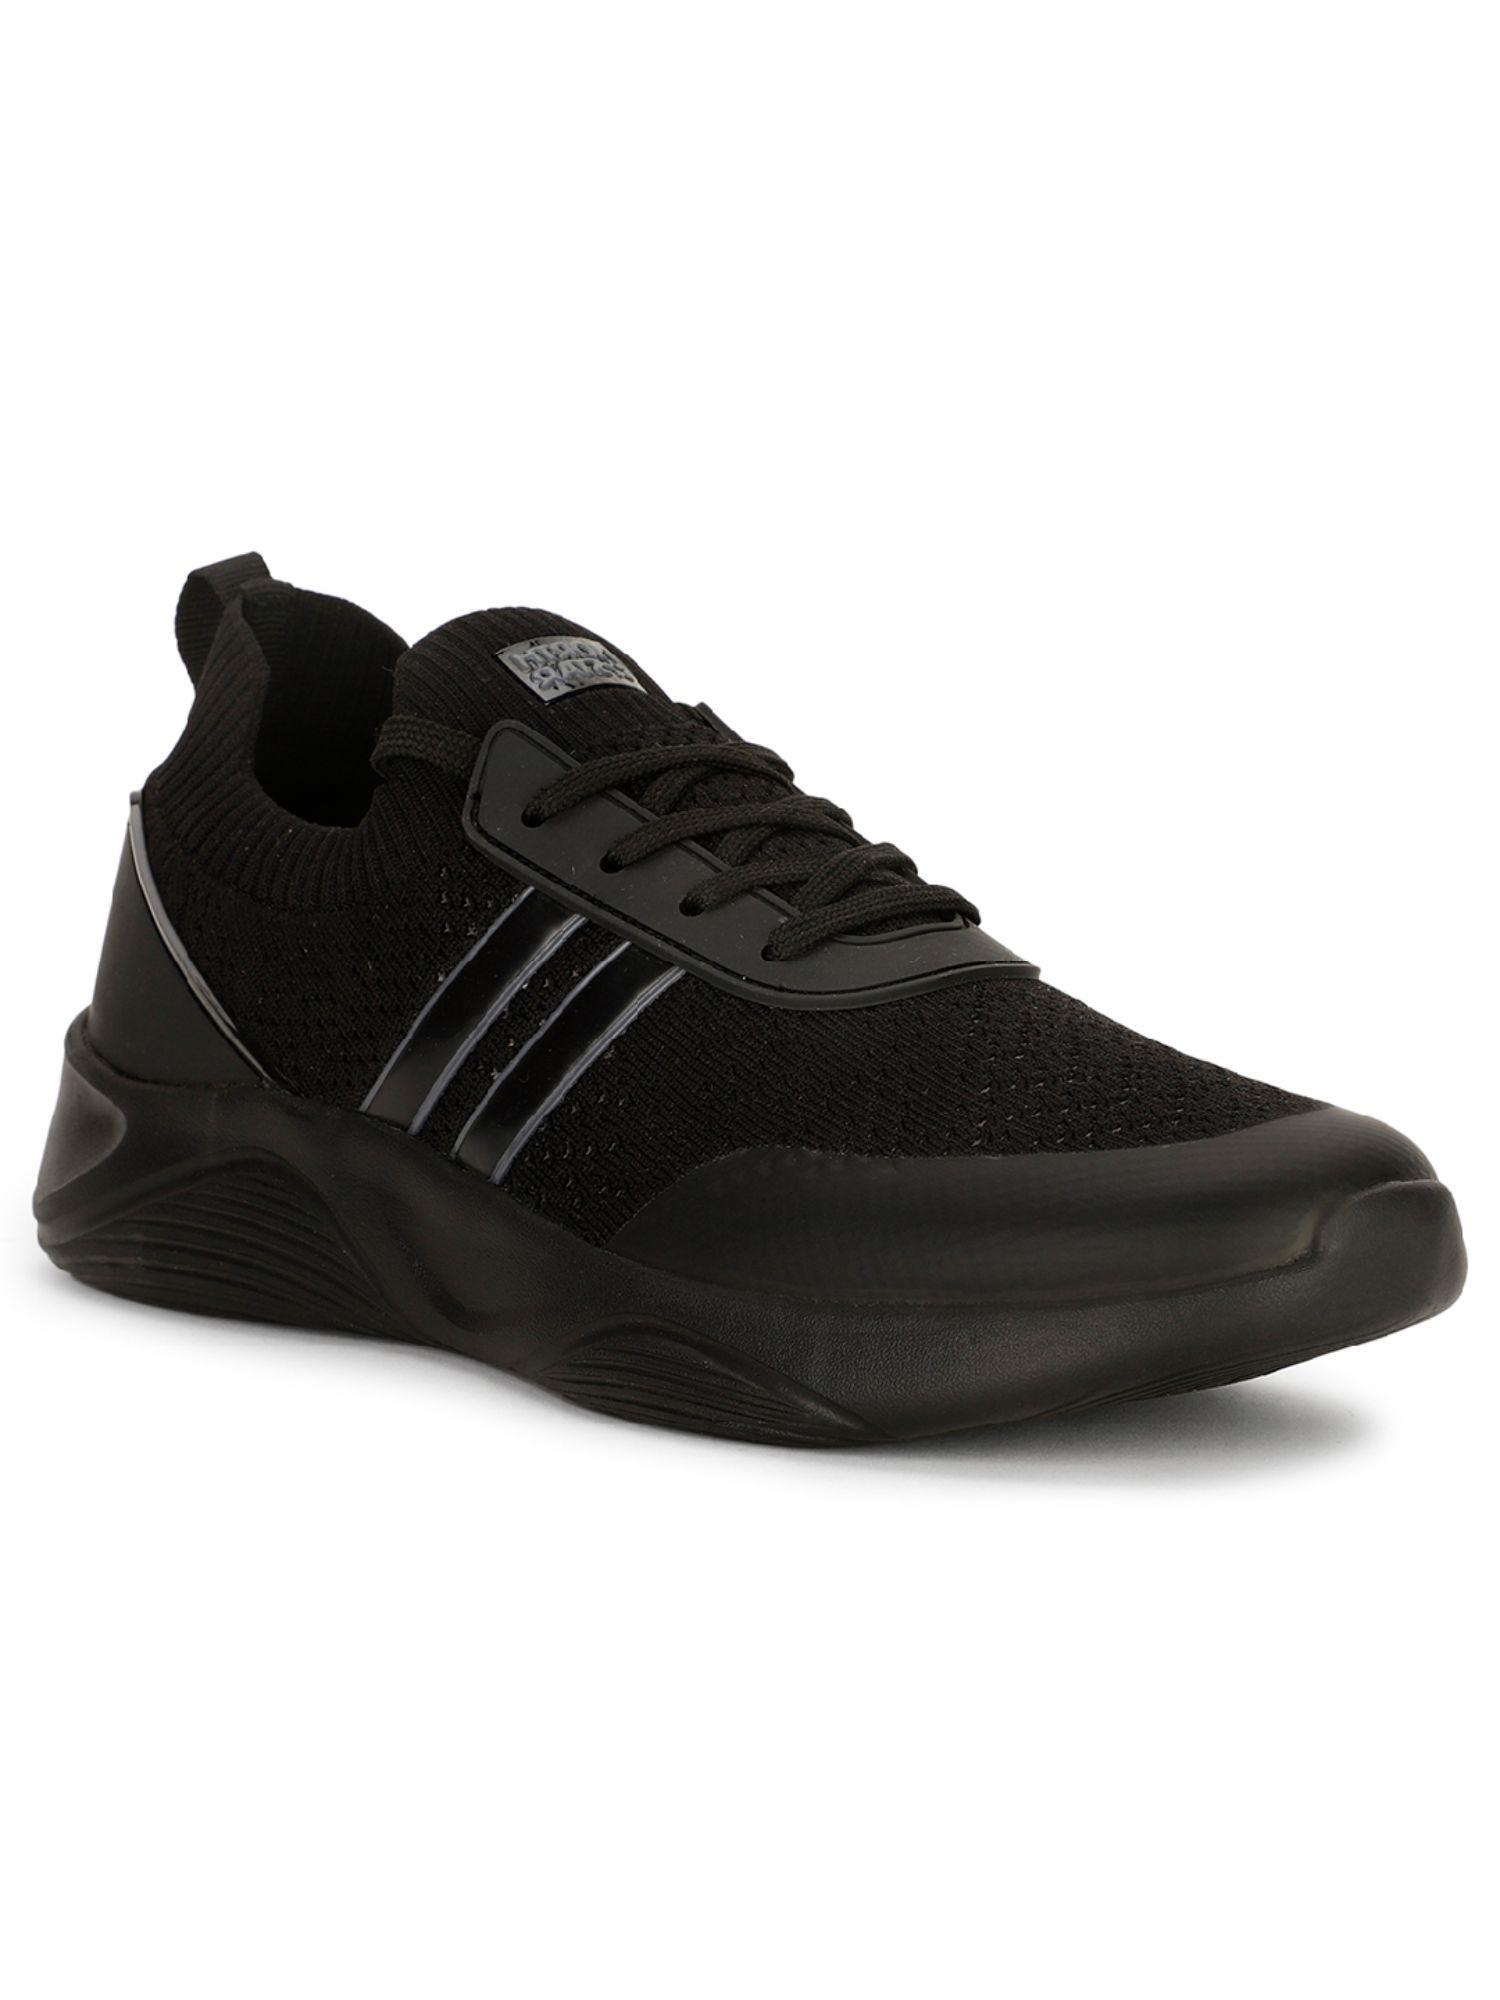 mens black lace-ups running shoes